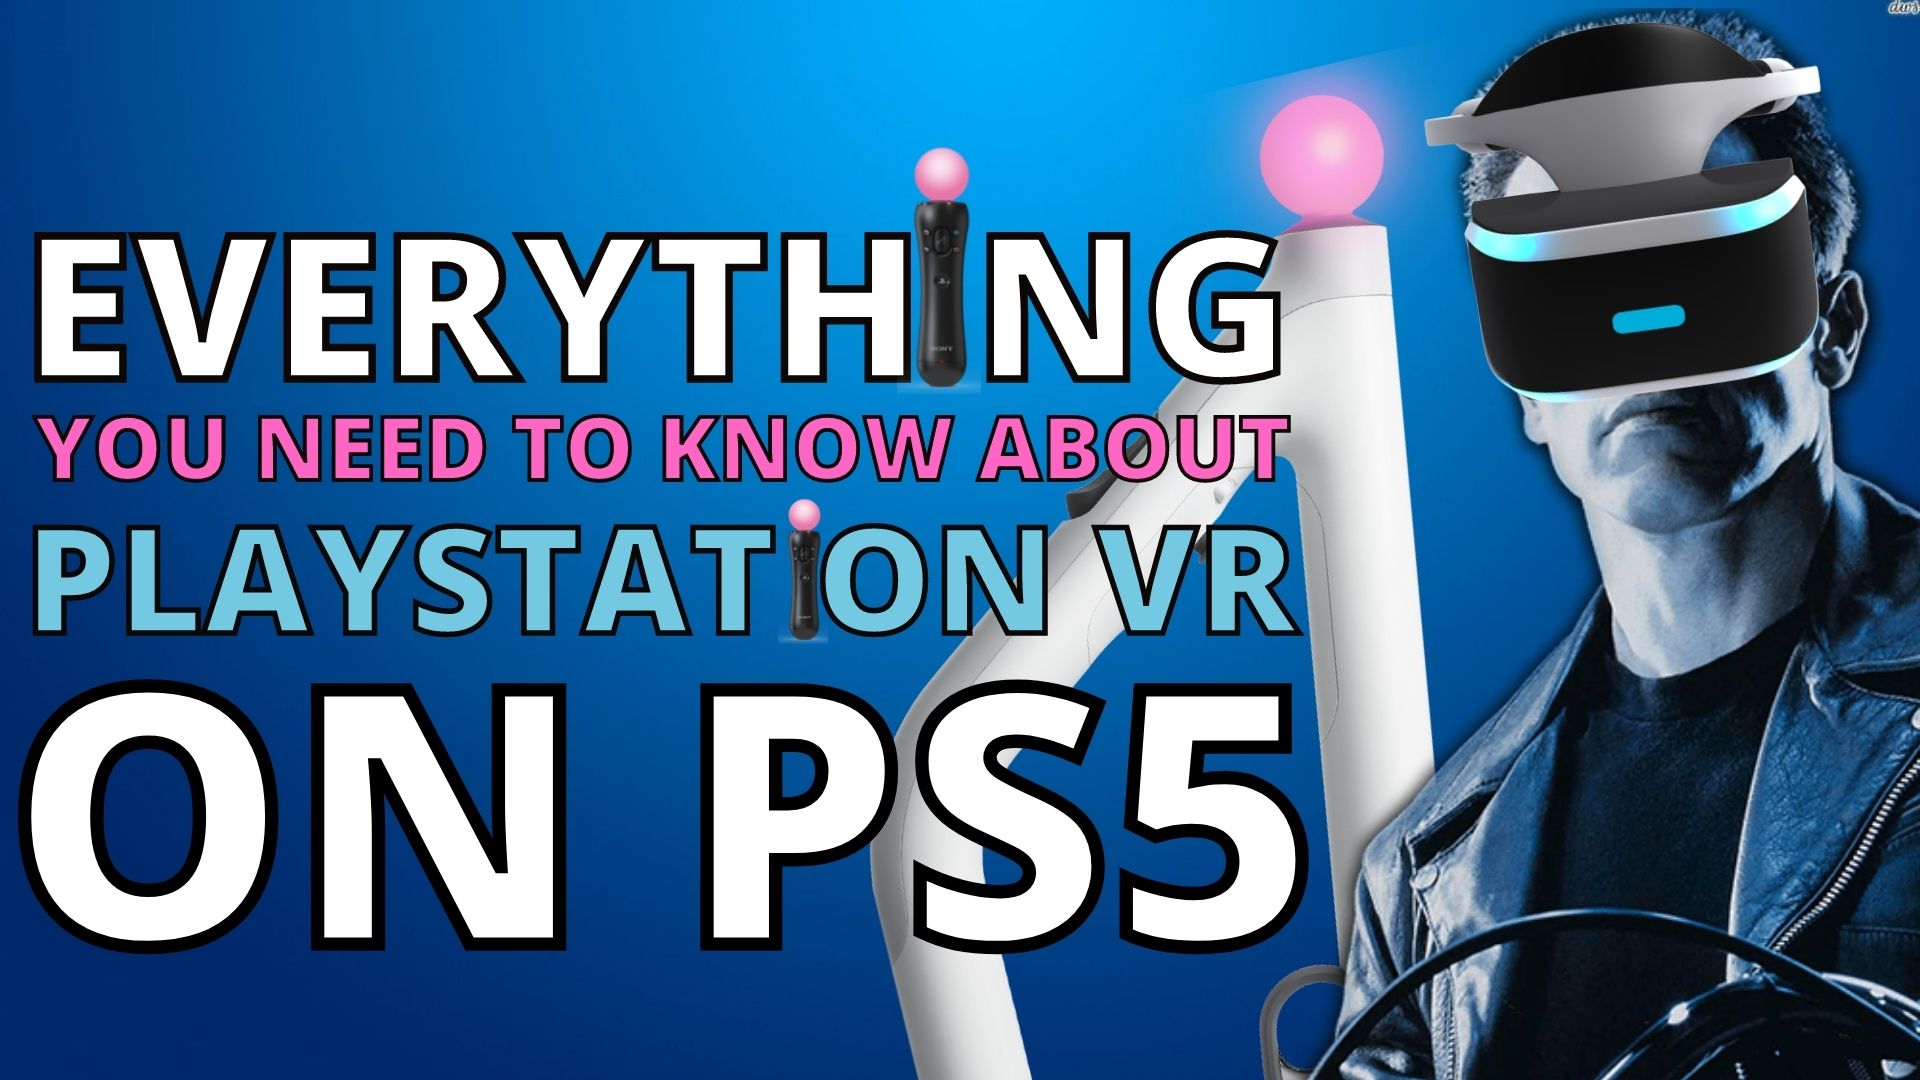 Guide: How Does PSVR Work on PS5? PS4 Camera, Adapter, and Accessories Required